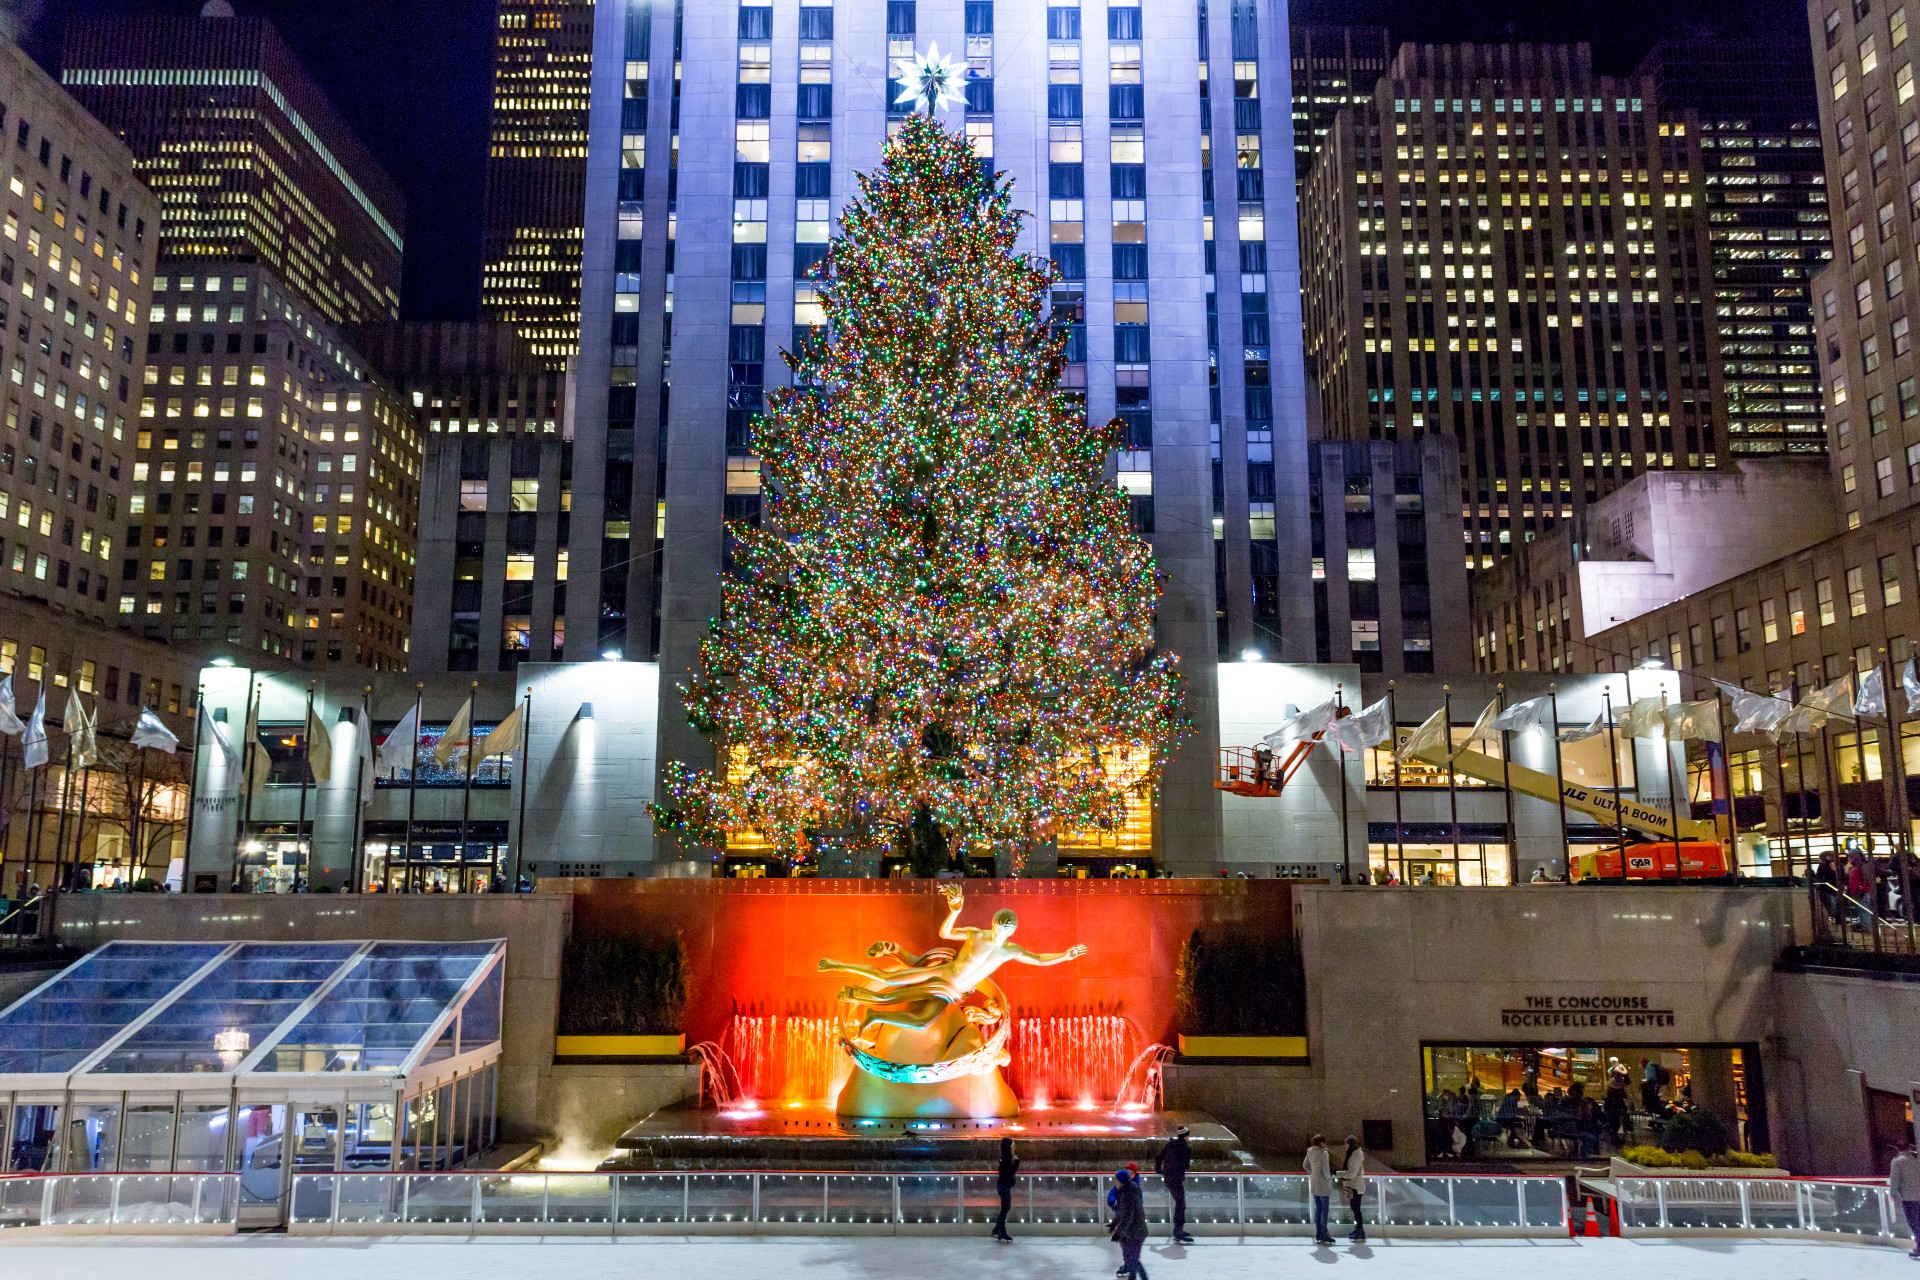 A Christmas tree is lit at Rockefeller Center.